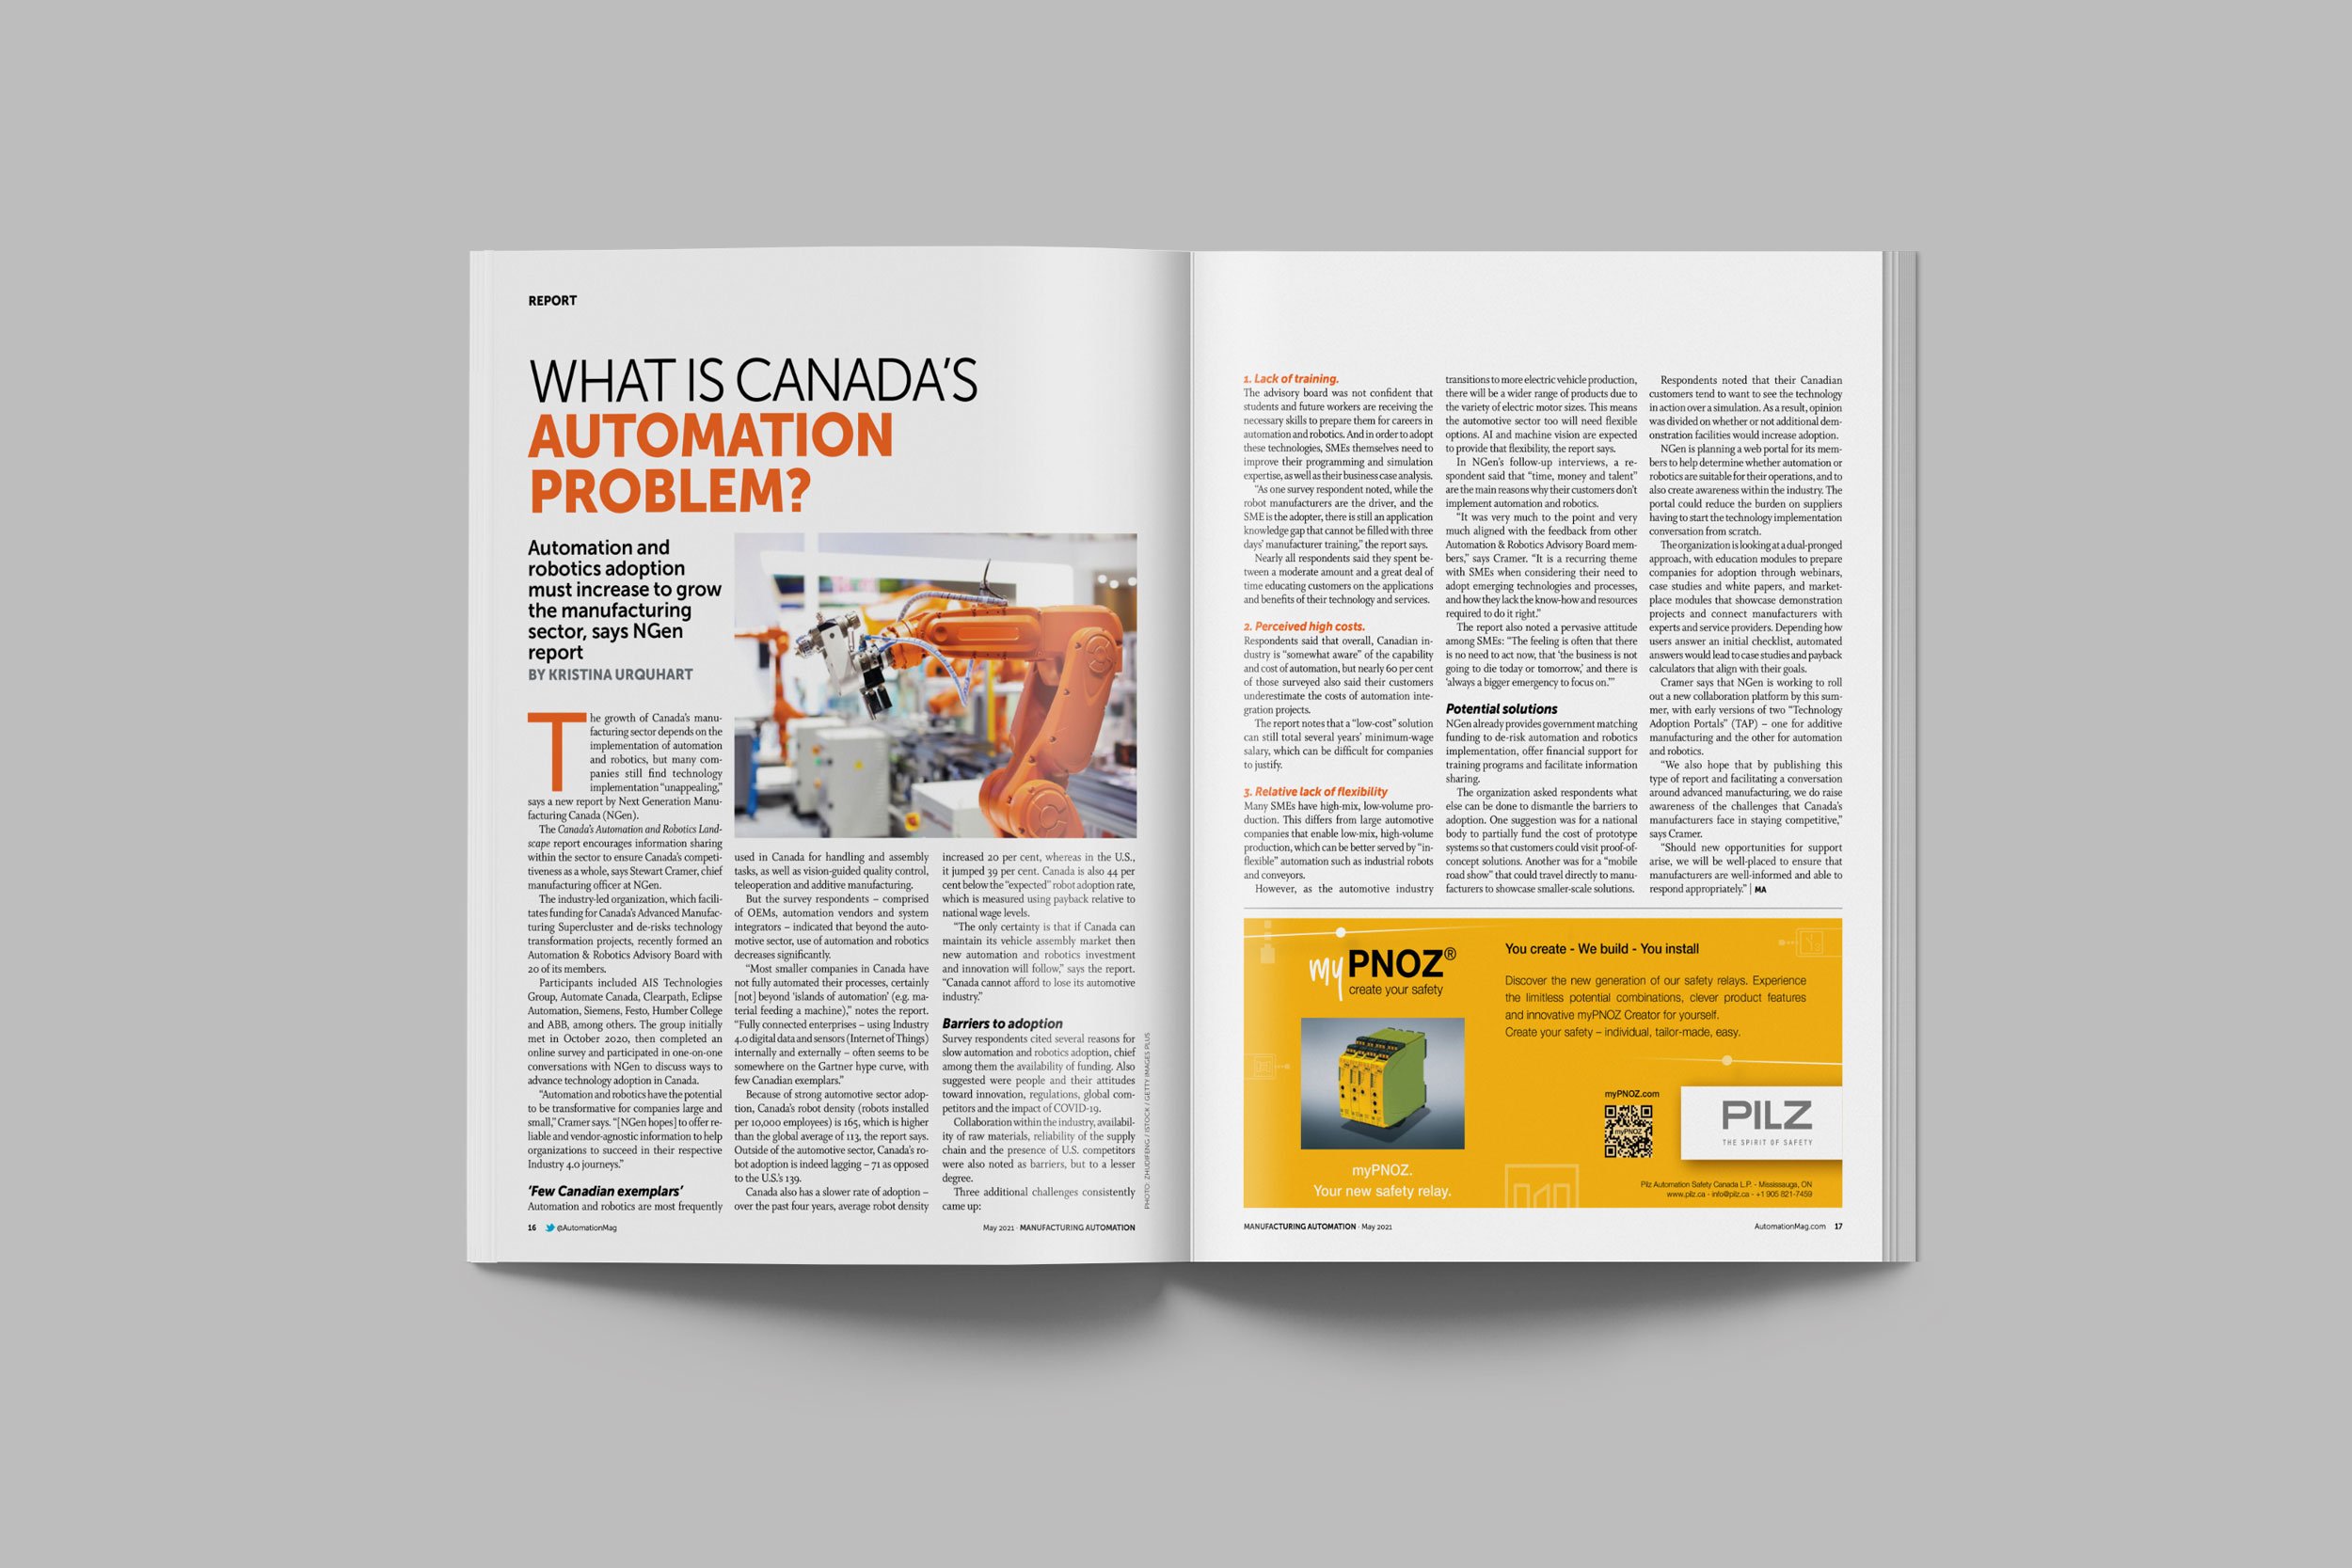 What is Canada's Automation Problem?